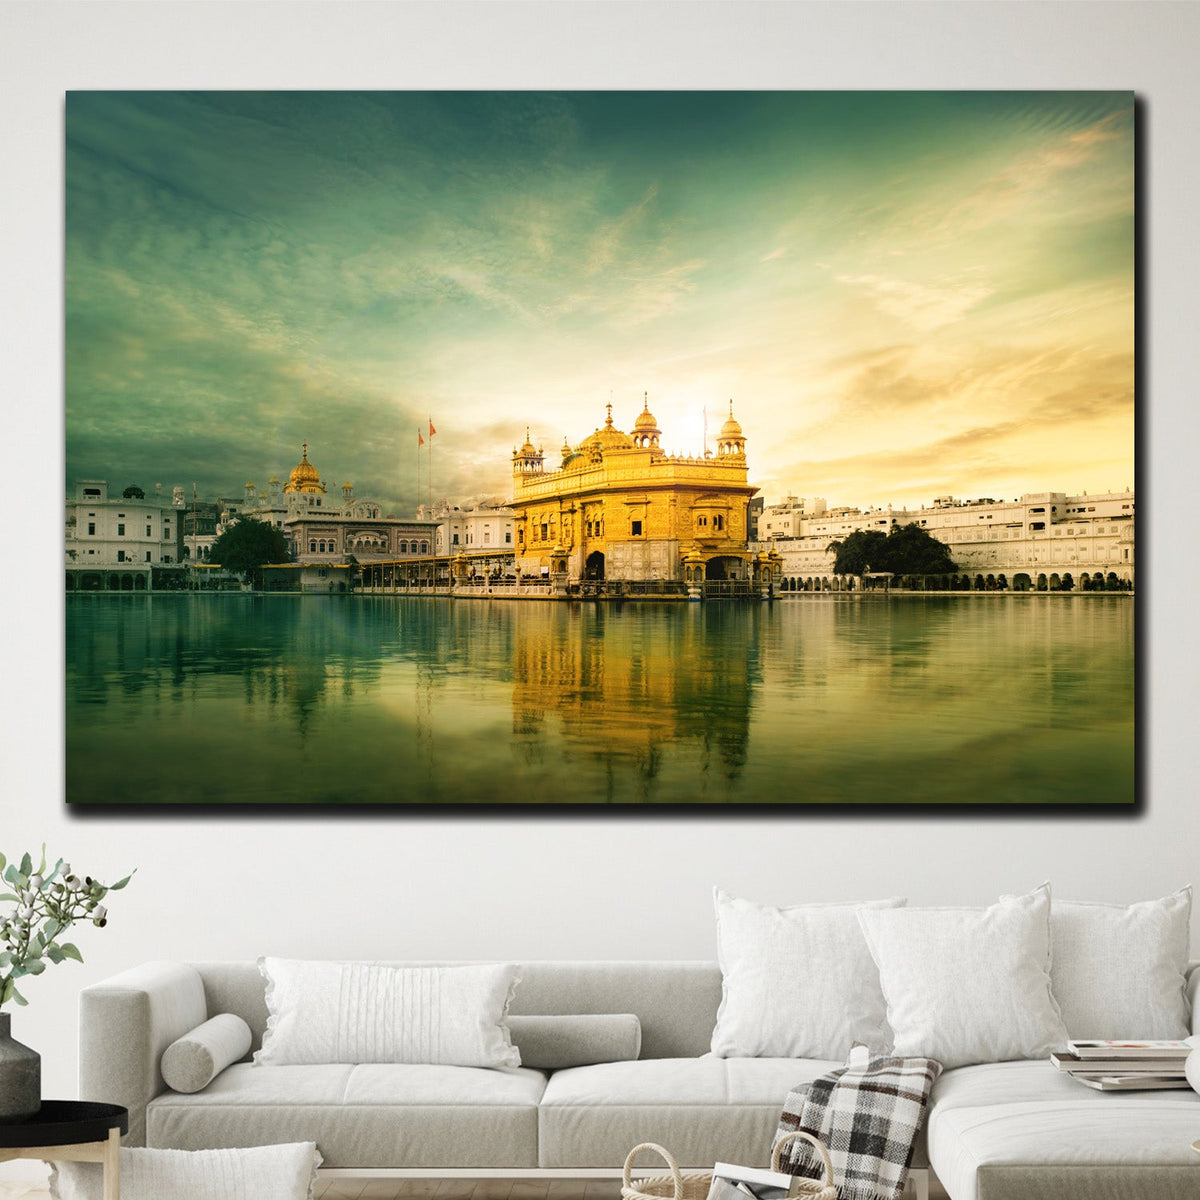 https://cdn.shopify.com/s/files/1/0387/9986/8044/products/GoldenTempleSkylineCanvasArtprintStretched-3.jpg